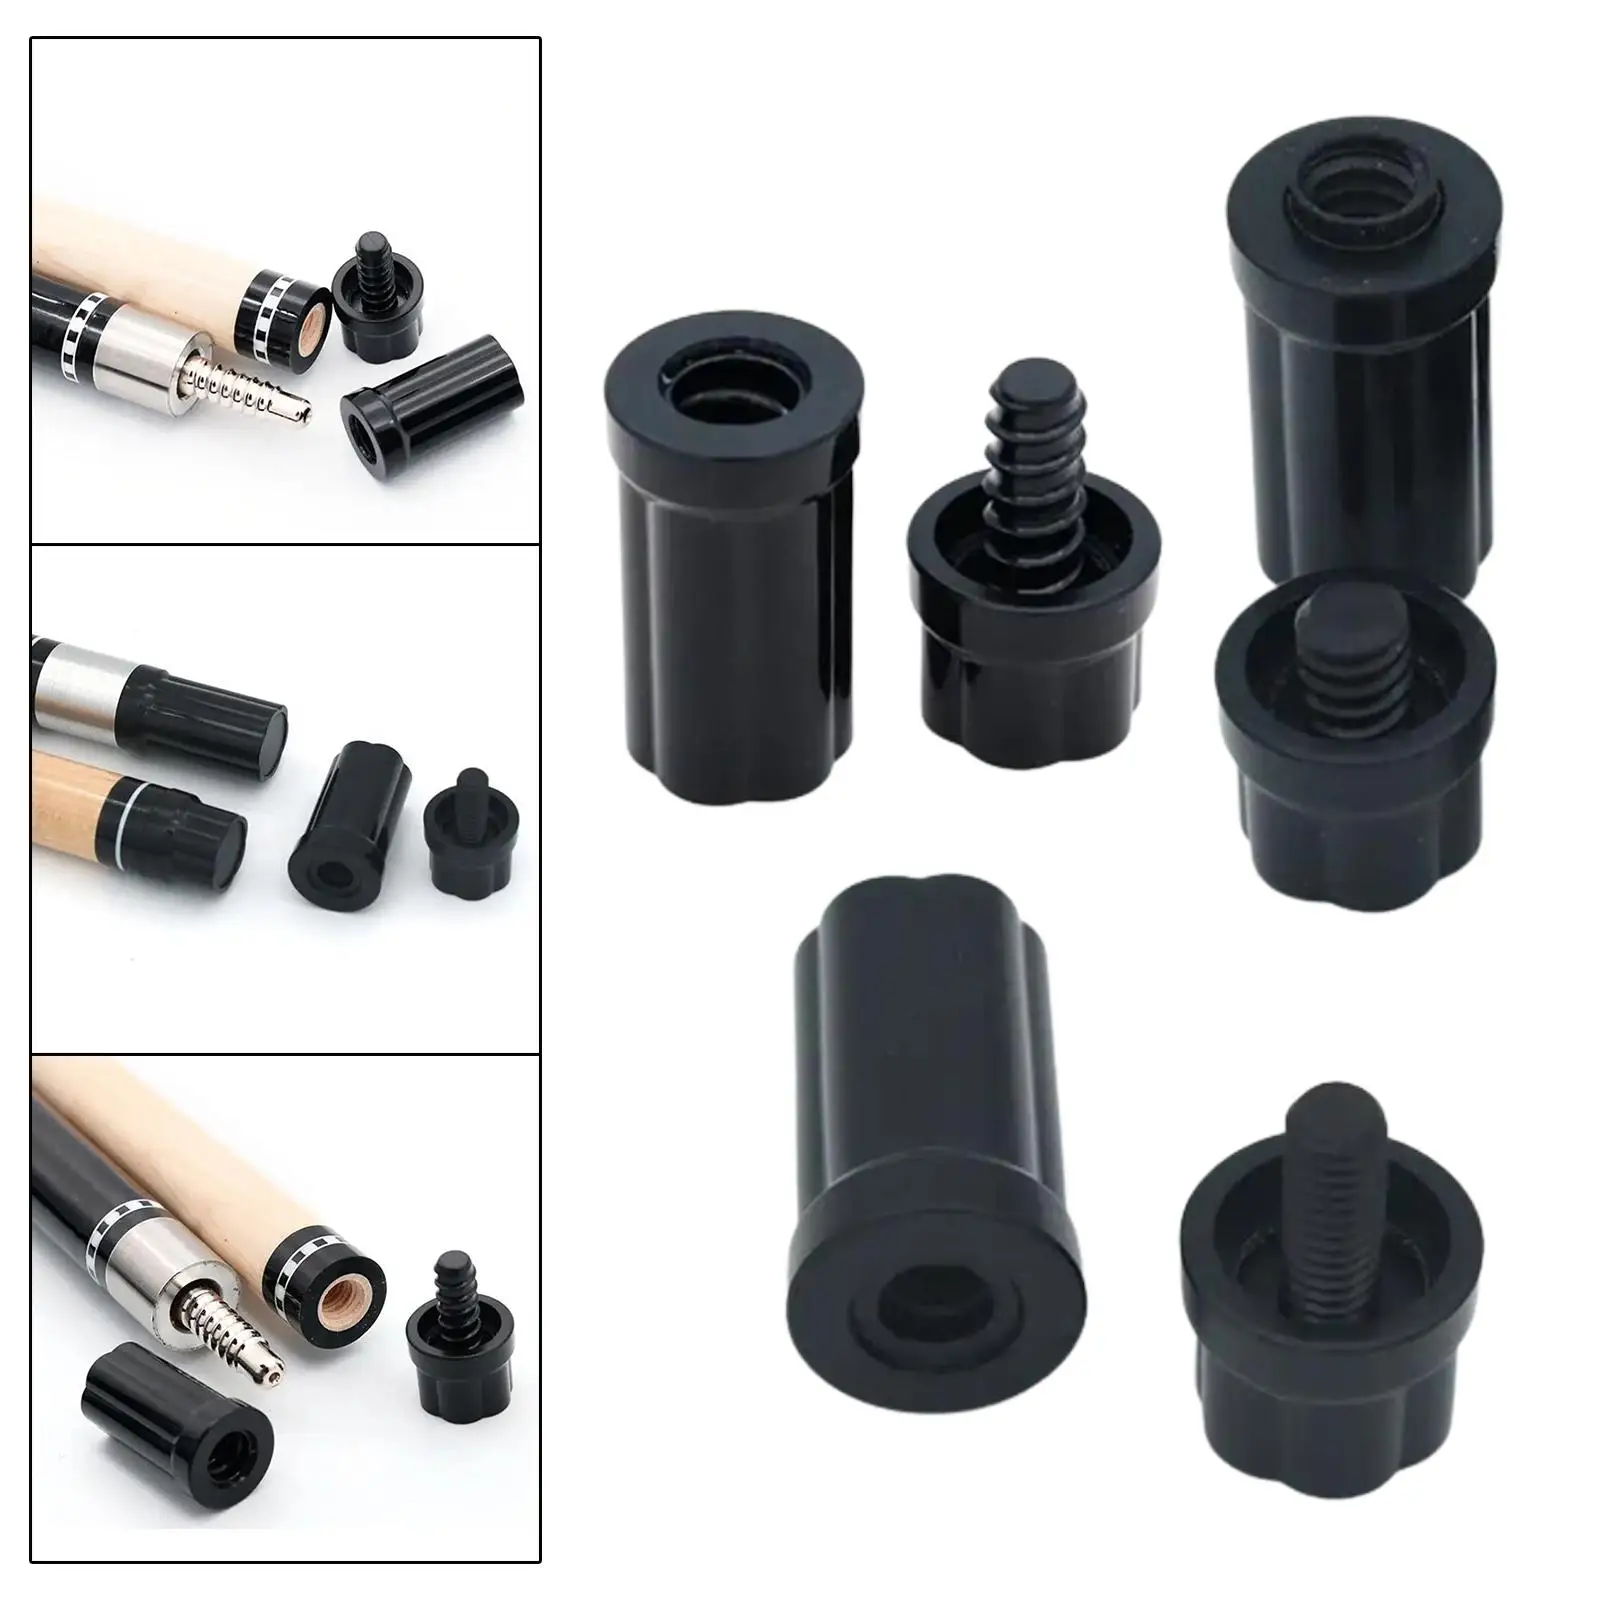 Joint Protector for Pool Cue Tool Reusable Billiards Stick Protective for Protect Shaft and Head Repairing Outdoor Sports